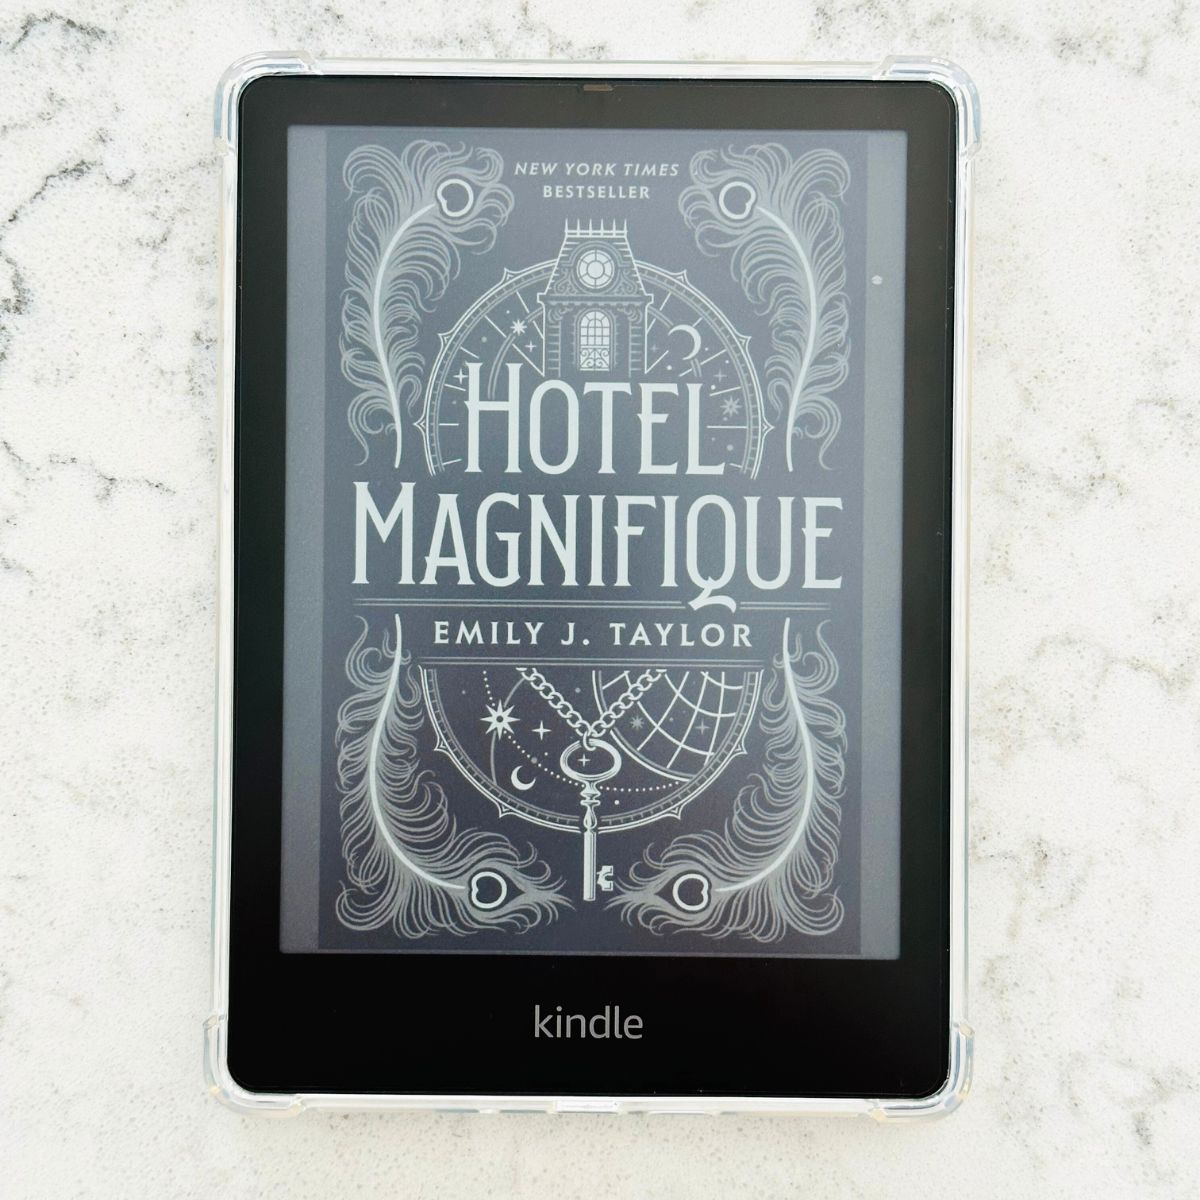 A Kindle Paperwhite has a clear plastic case in place and rests on the kitchen counter.